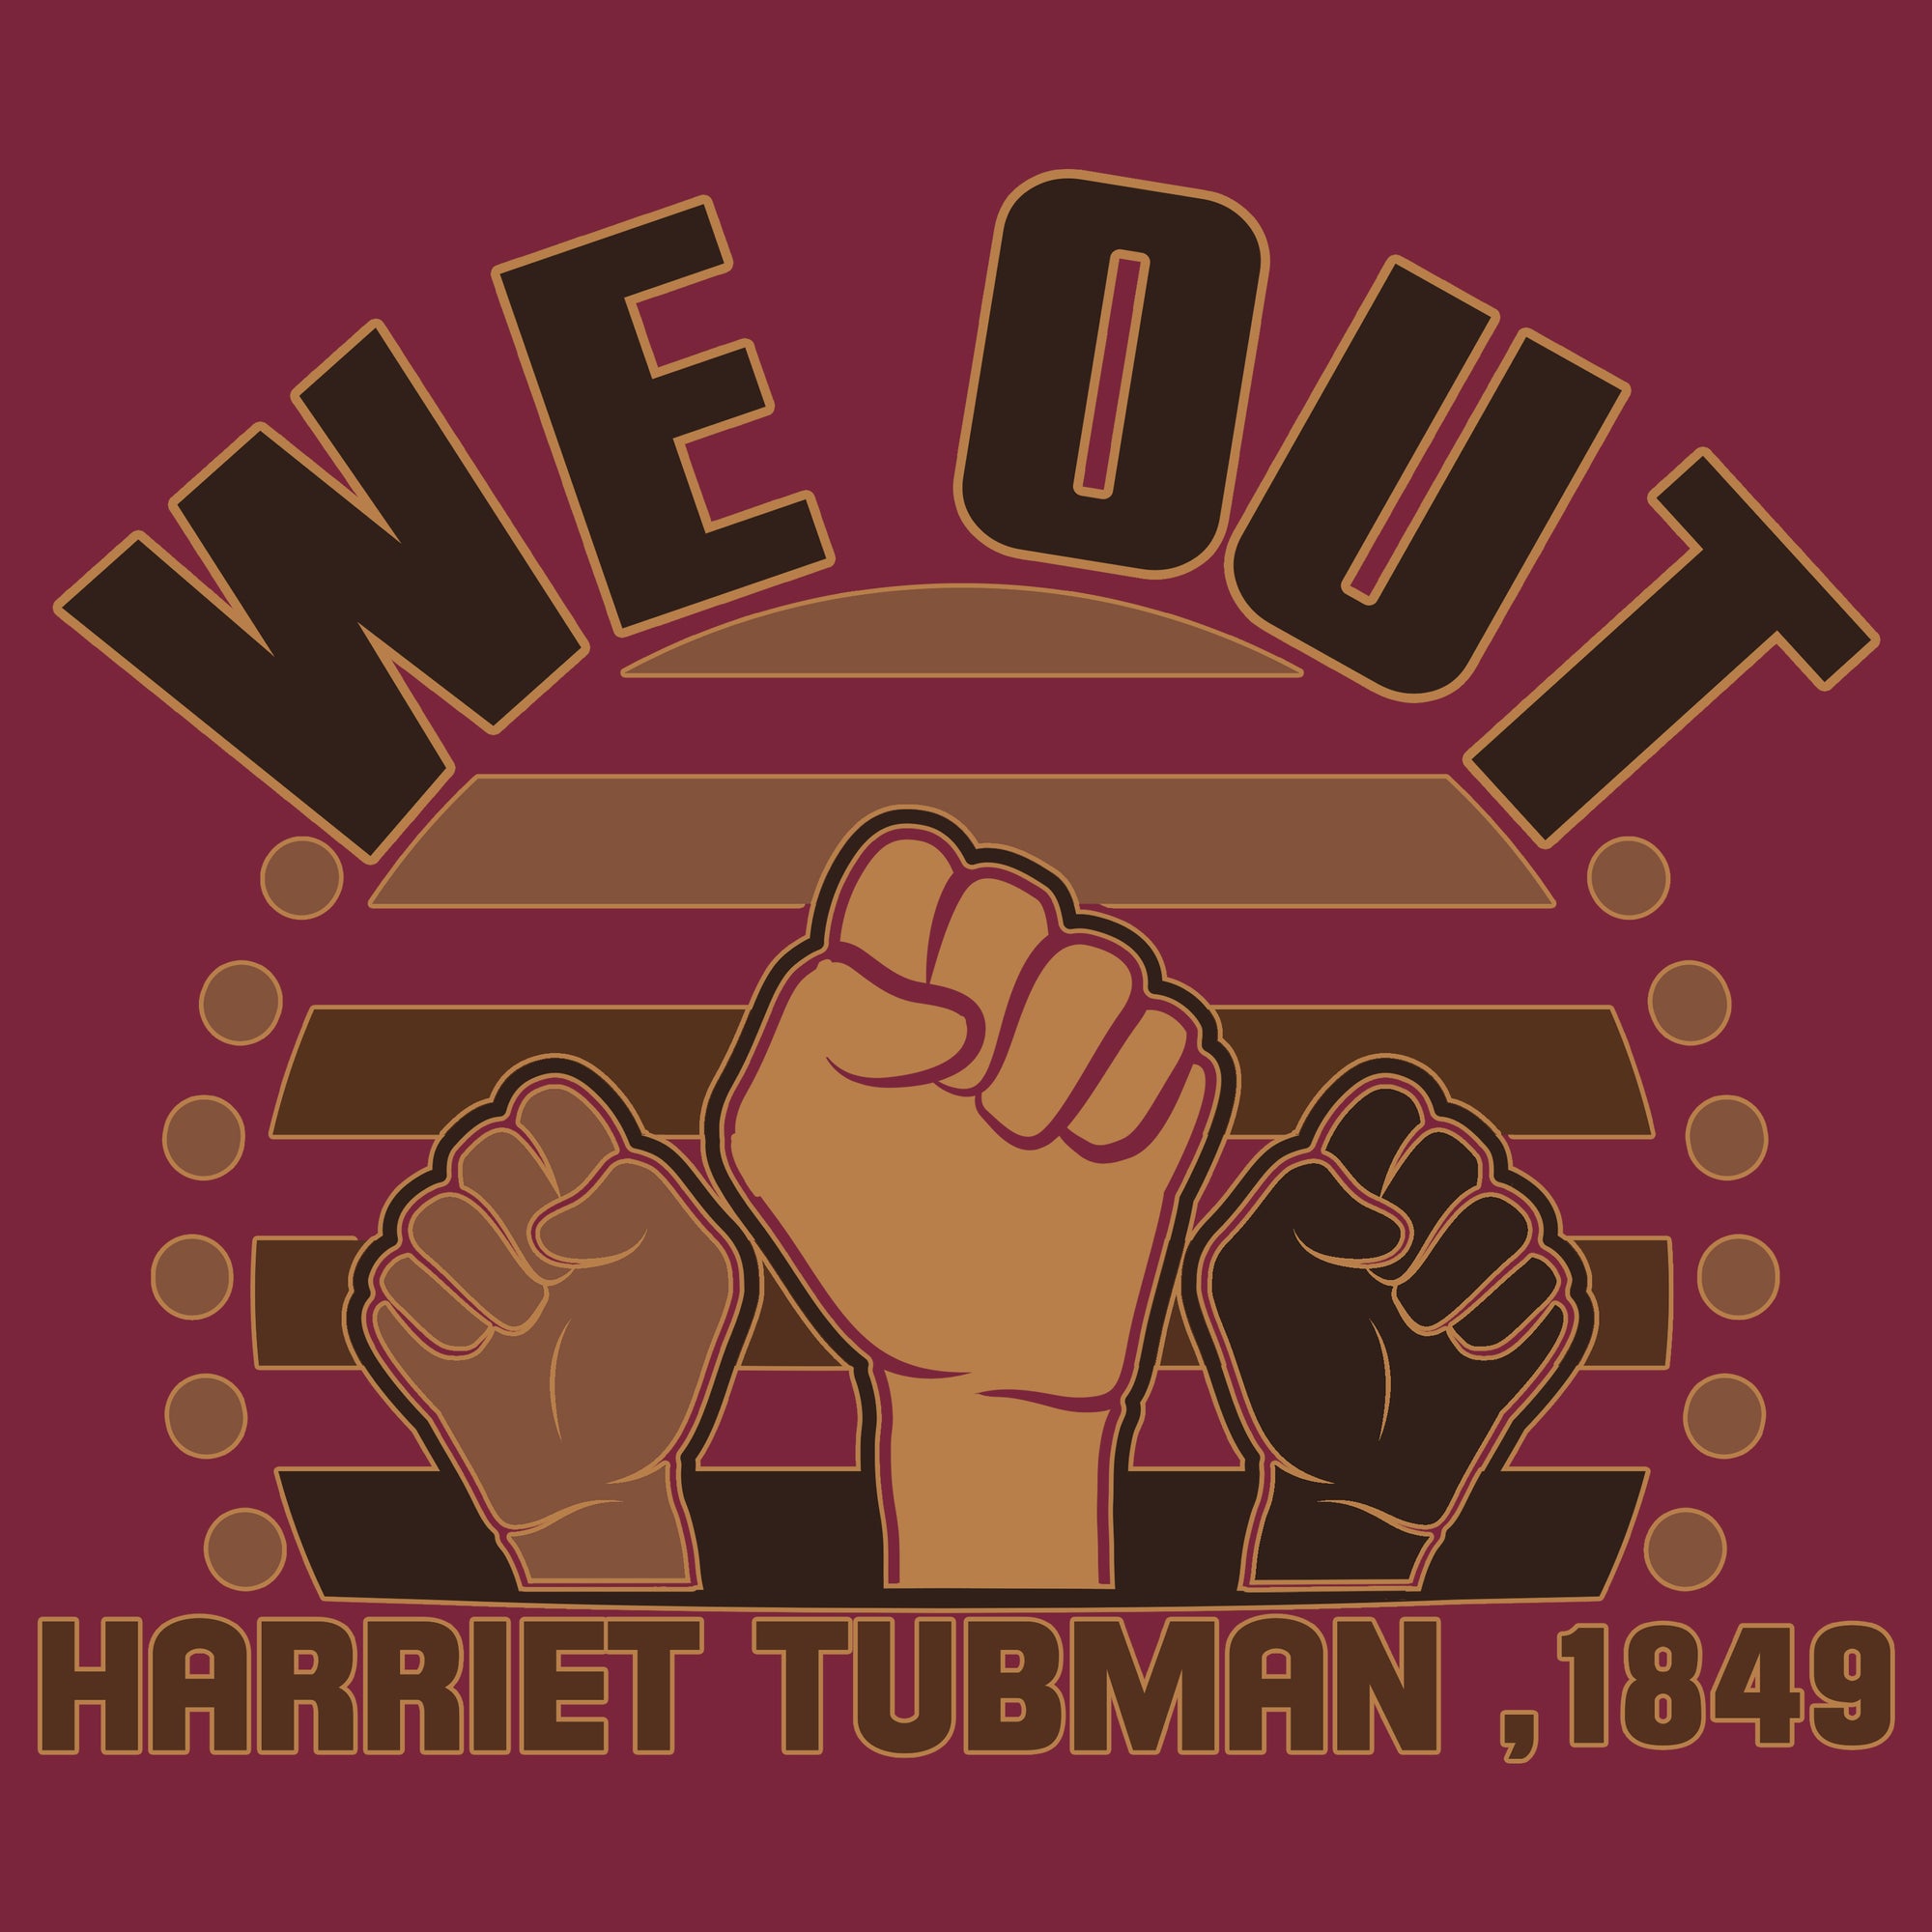 We Out Harriet Tubman Raised Fists BLM Mens T-shirt african, american, black, blm, harriet, harriett, lives, matter, out, shirt, tubman, we by Expression Tees